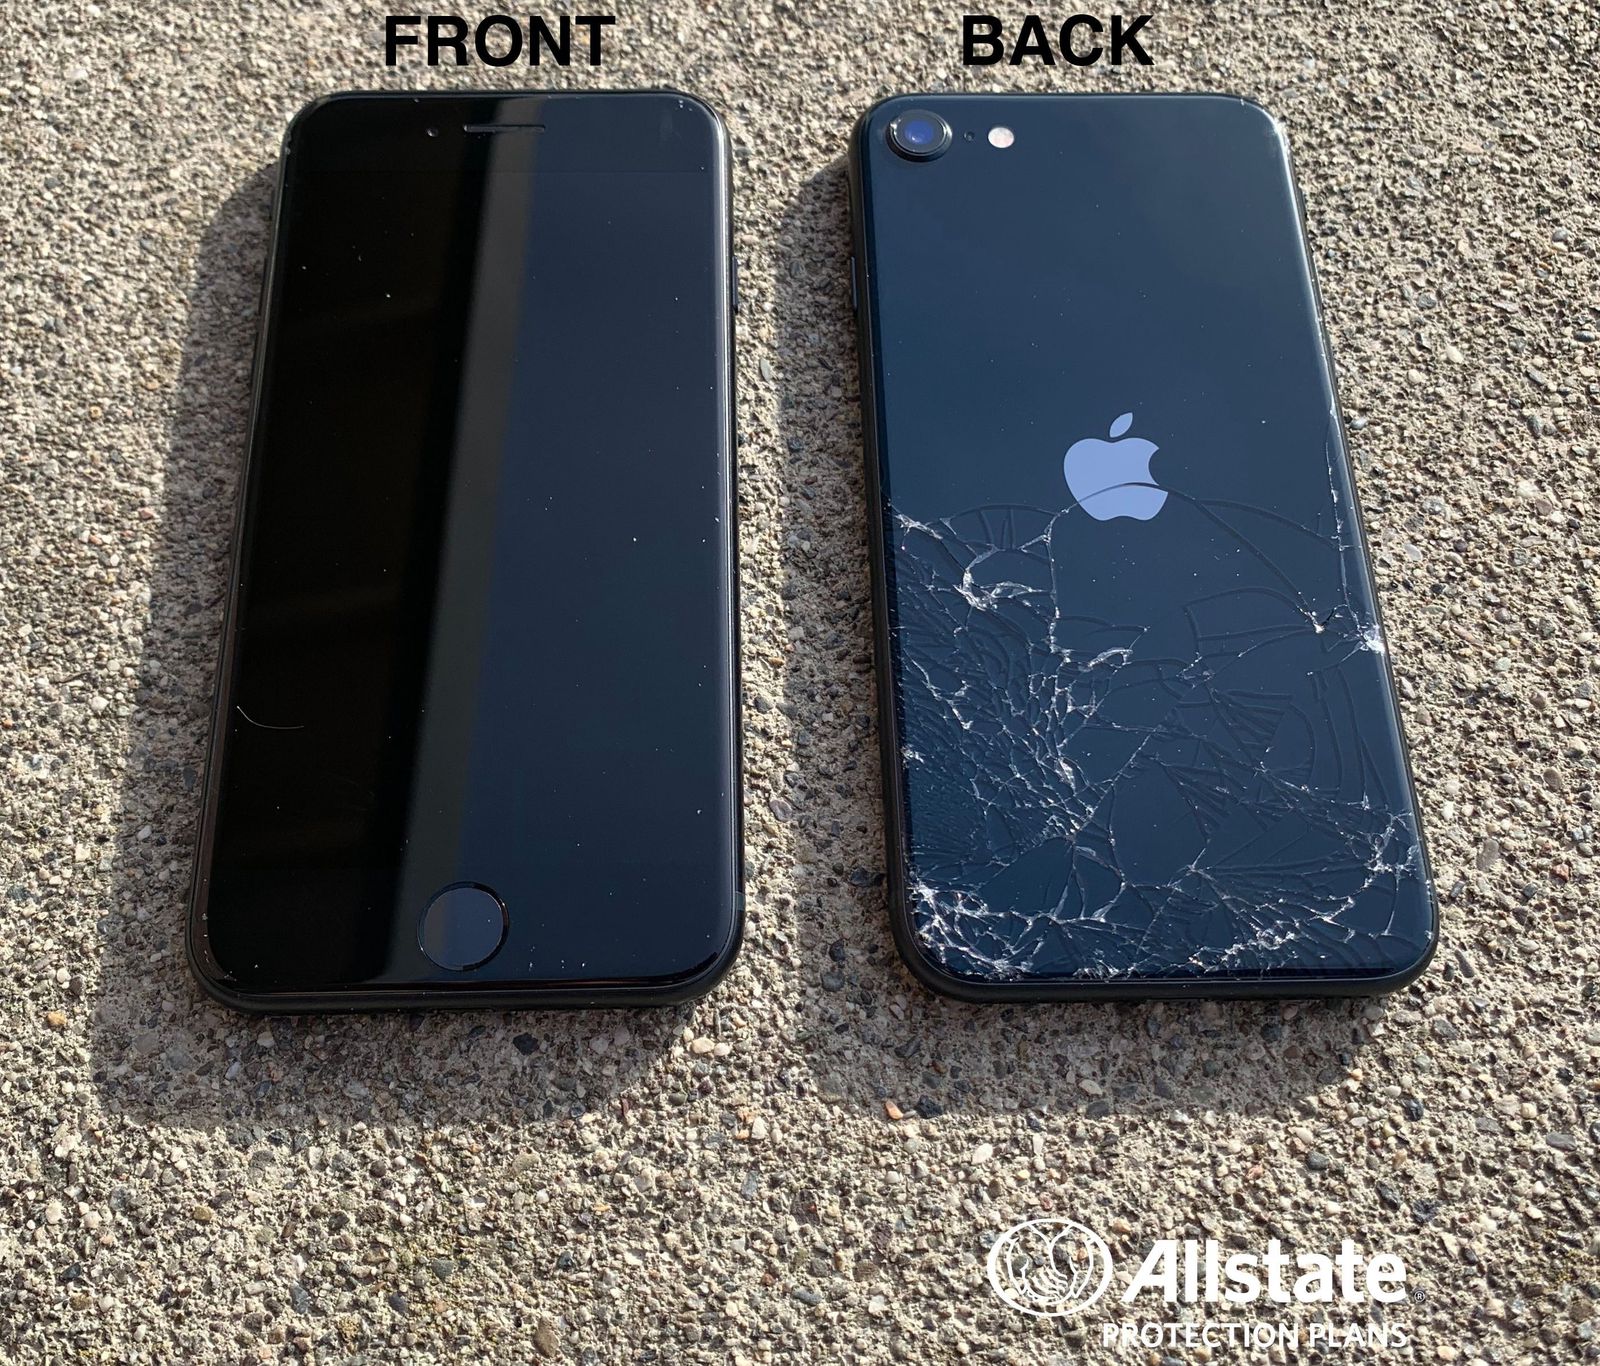 Which iphones have the strongest glass?